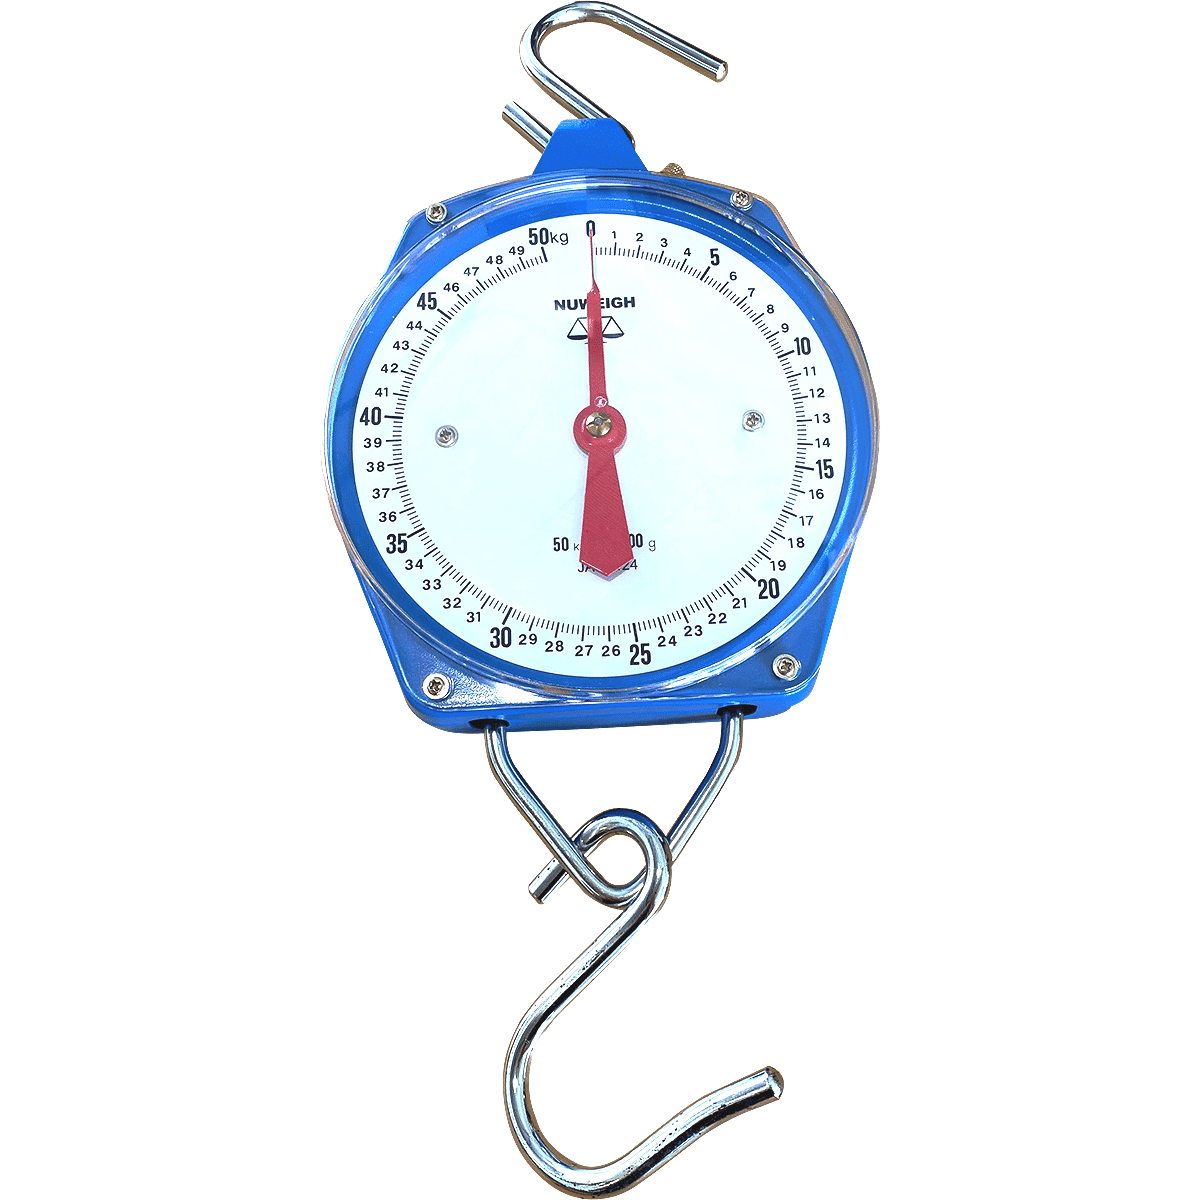 Nuweigh JAC 424 HANGING SCALES 10KG X 50G